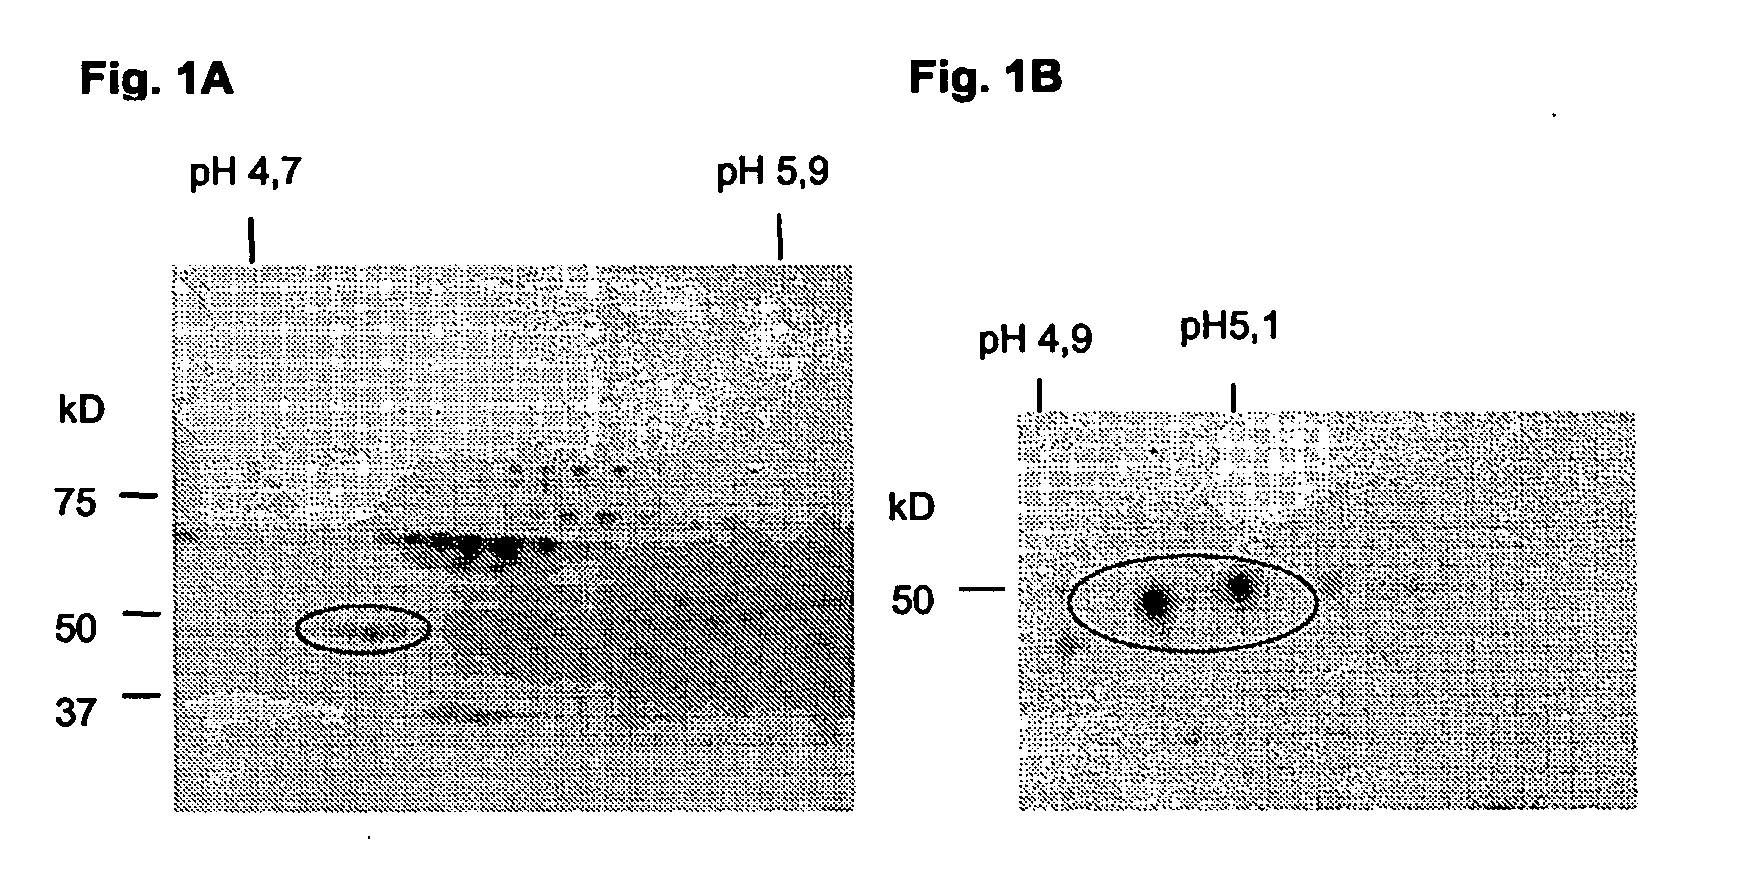 Method for the identification of atypical p-anca